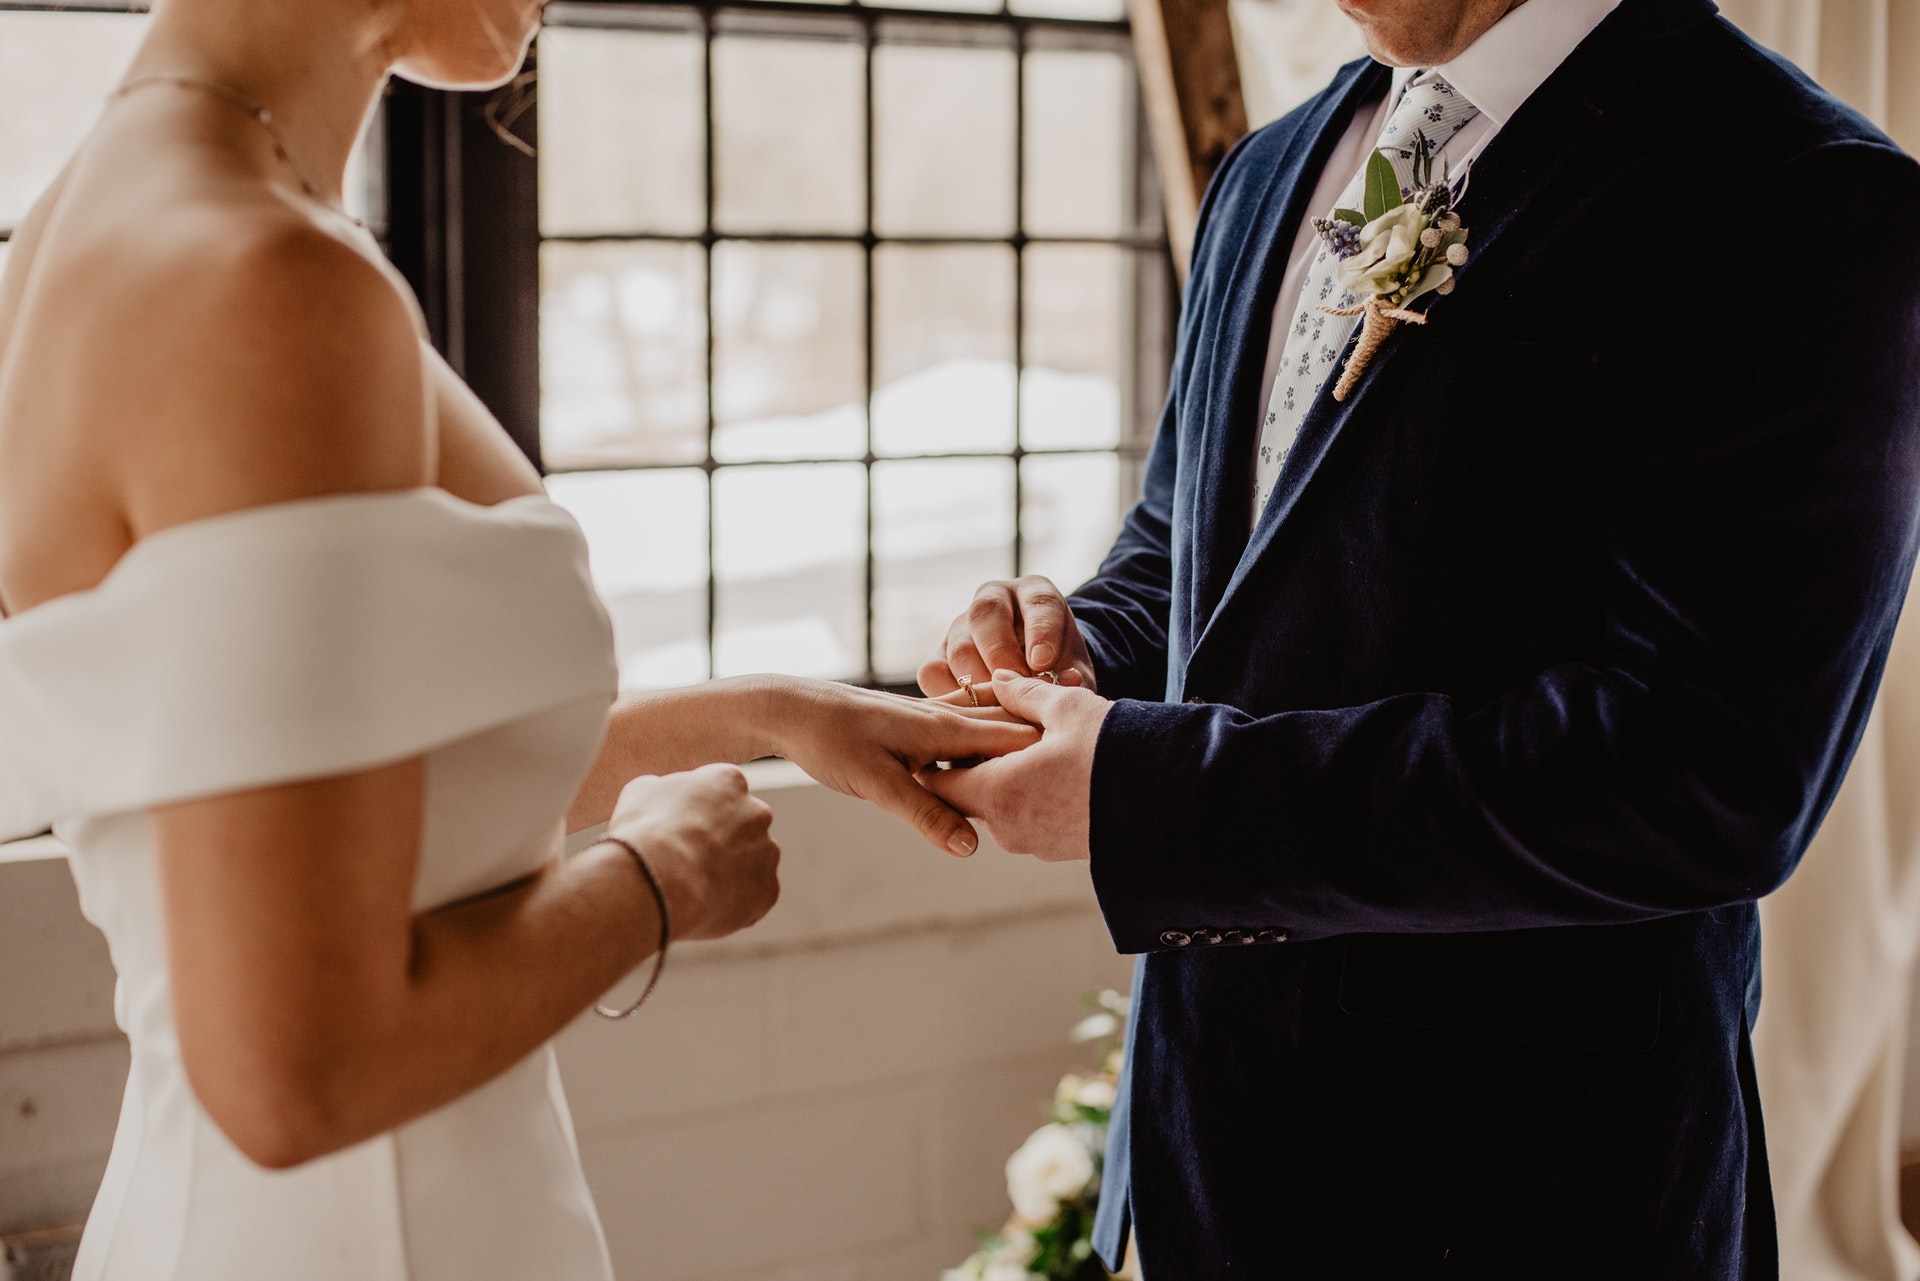 Putting the wedding ring on finger